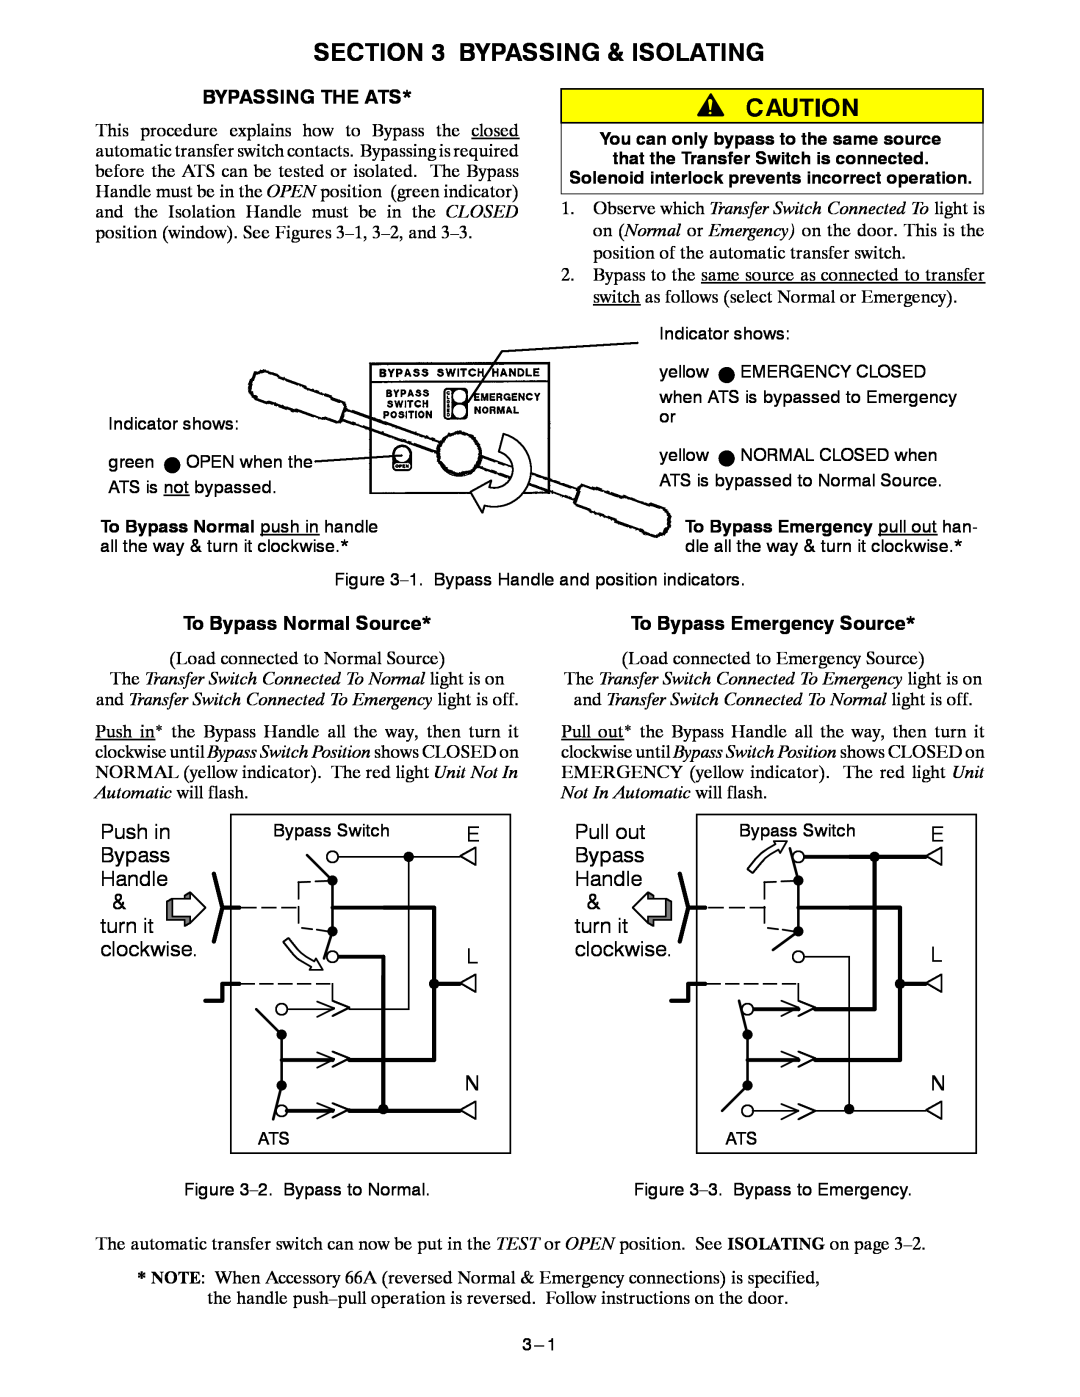 Emerson 7ACTB manual Bypassing & Isolating, Bypassing The Ats, To Bypass Normal Source, To Bypass Emergency Source 